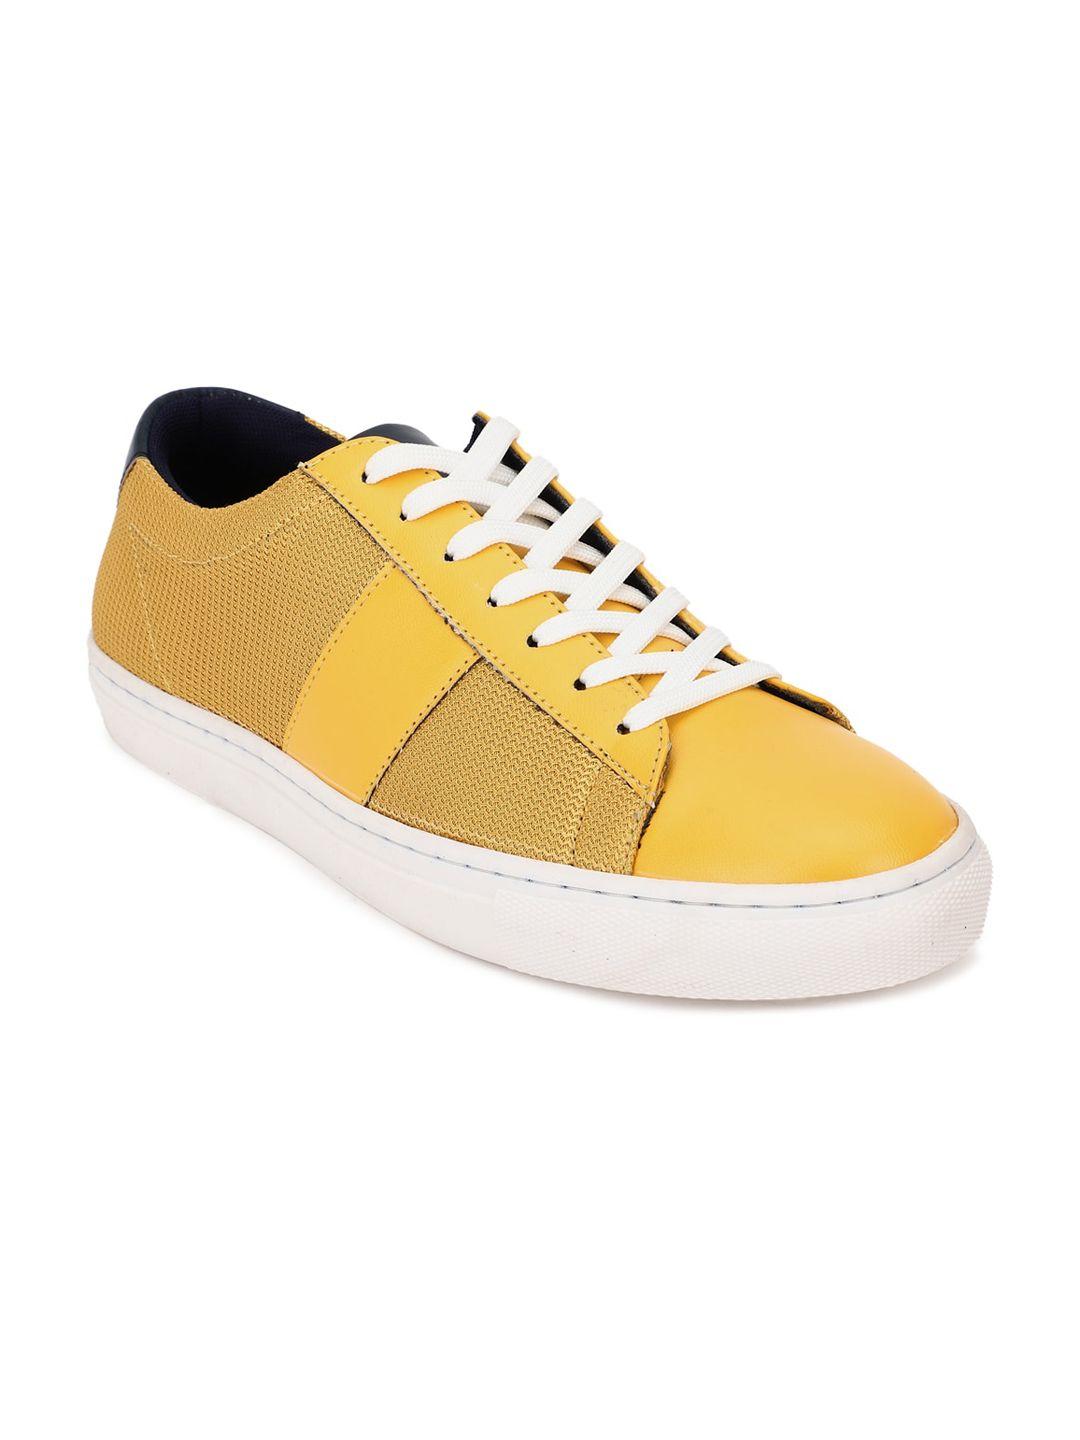 forever-21-women-yellow-textured-sneakers